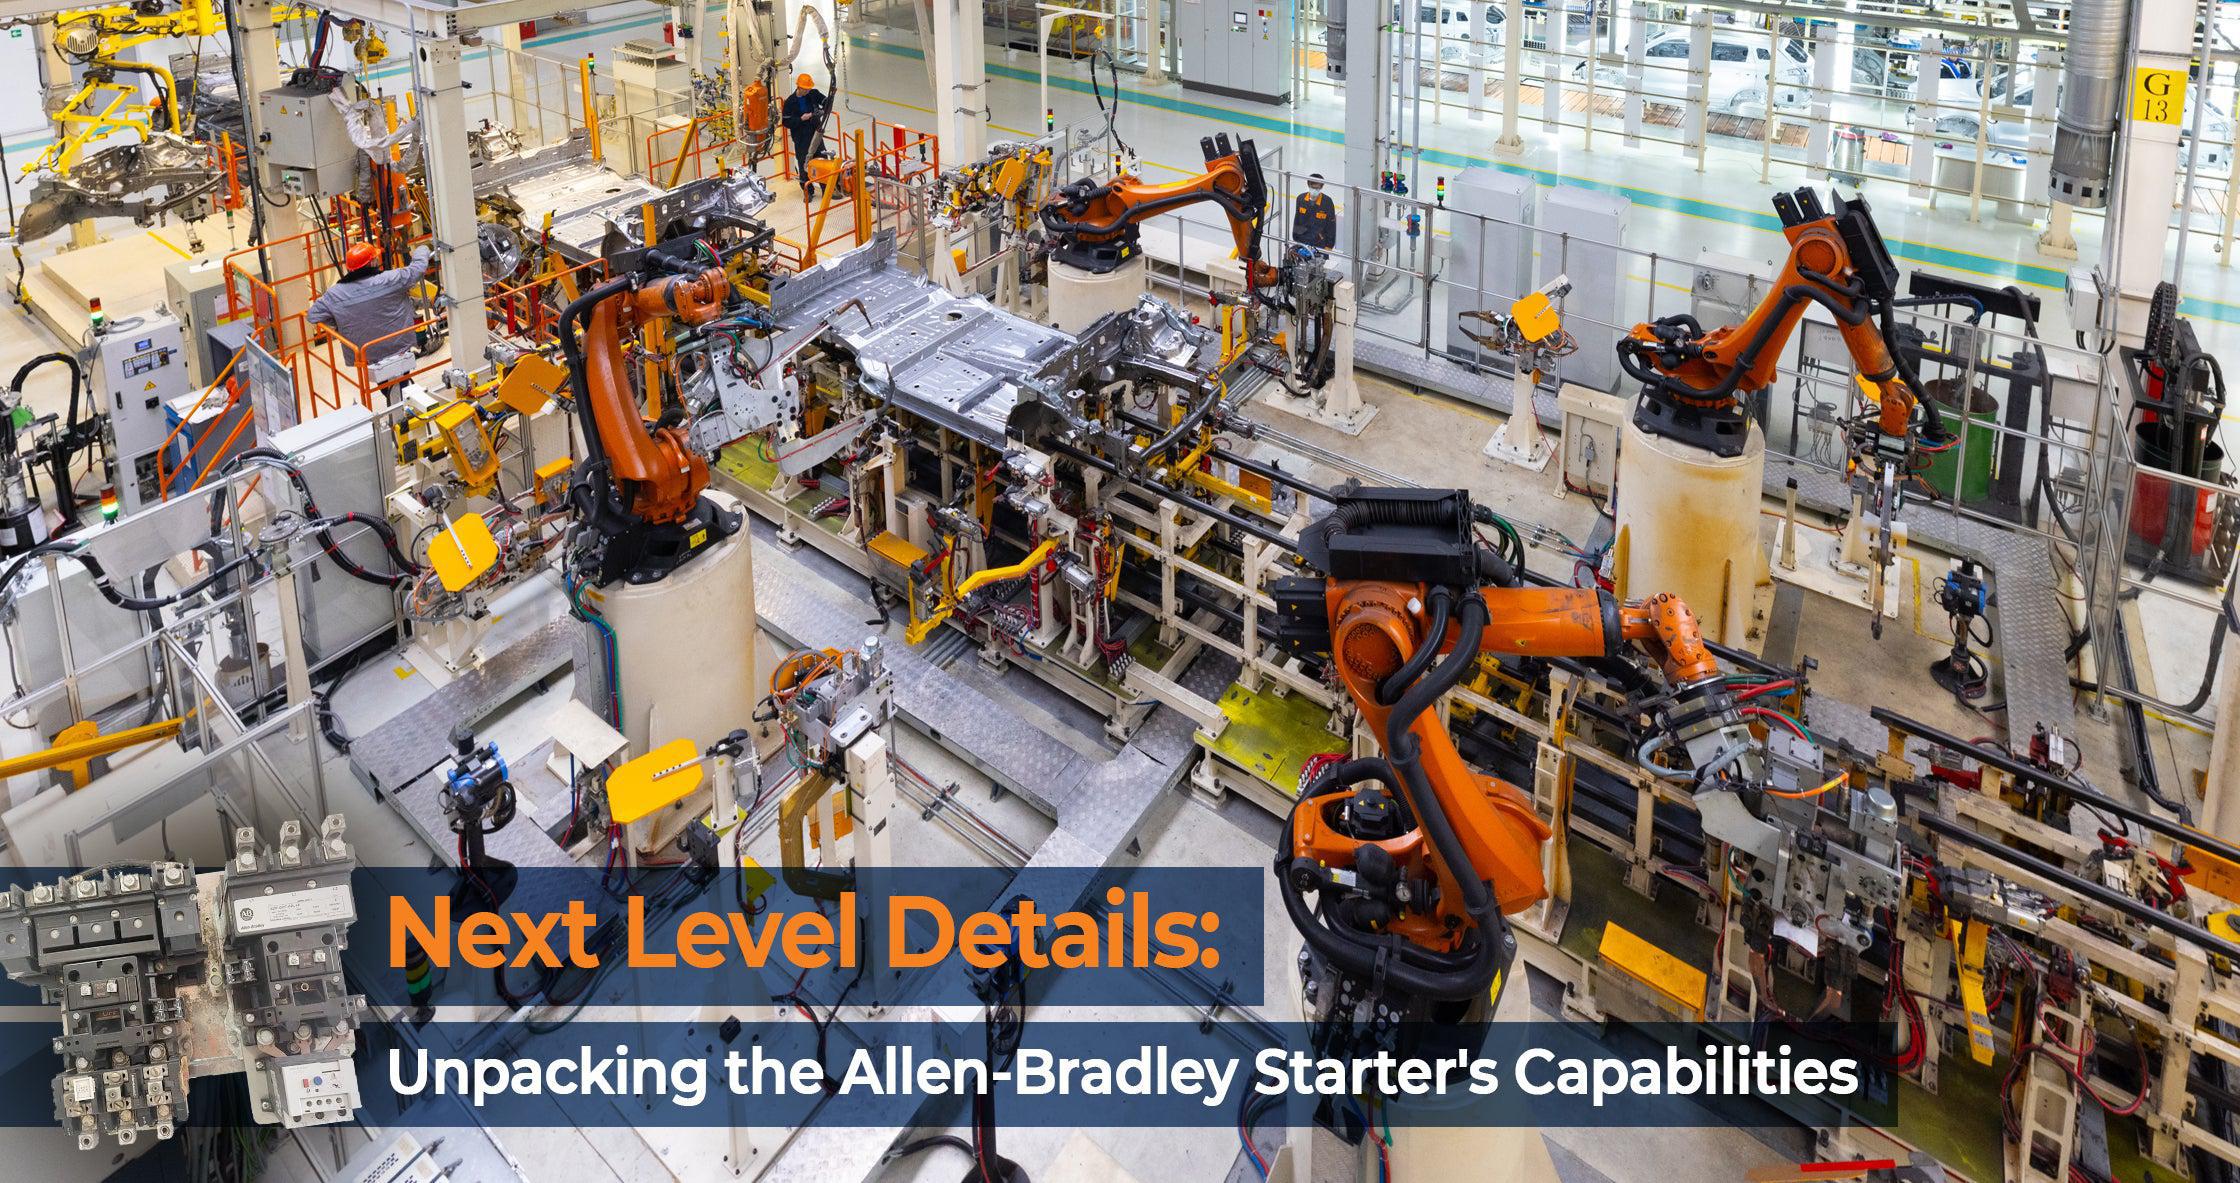 Automated assembly line with multiple orange robotic arms operating machinery, highlighting the efficiency of the Allen-Bradley Starter in industrial automation.